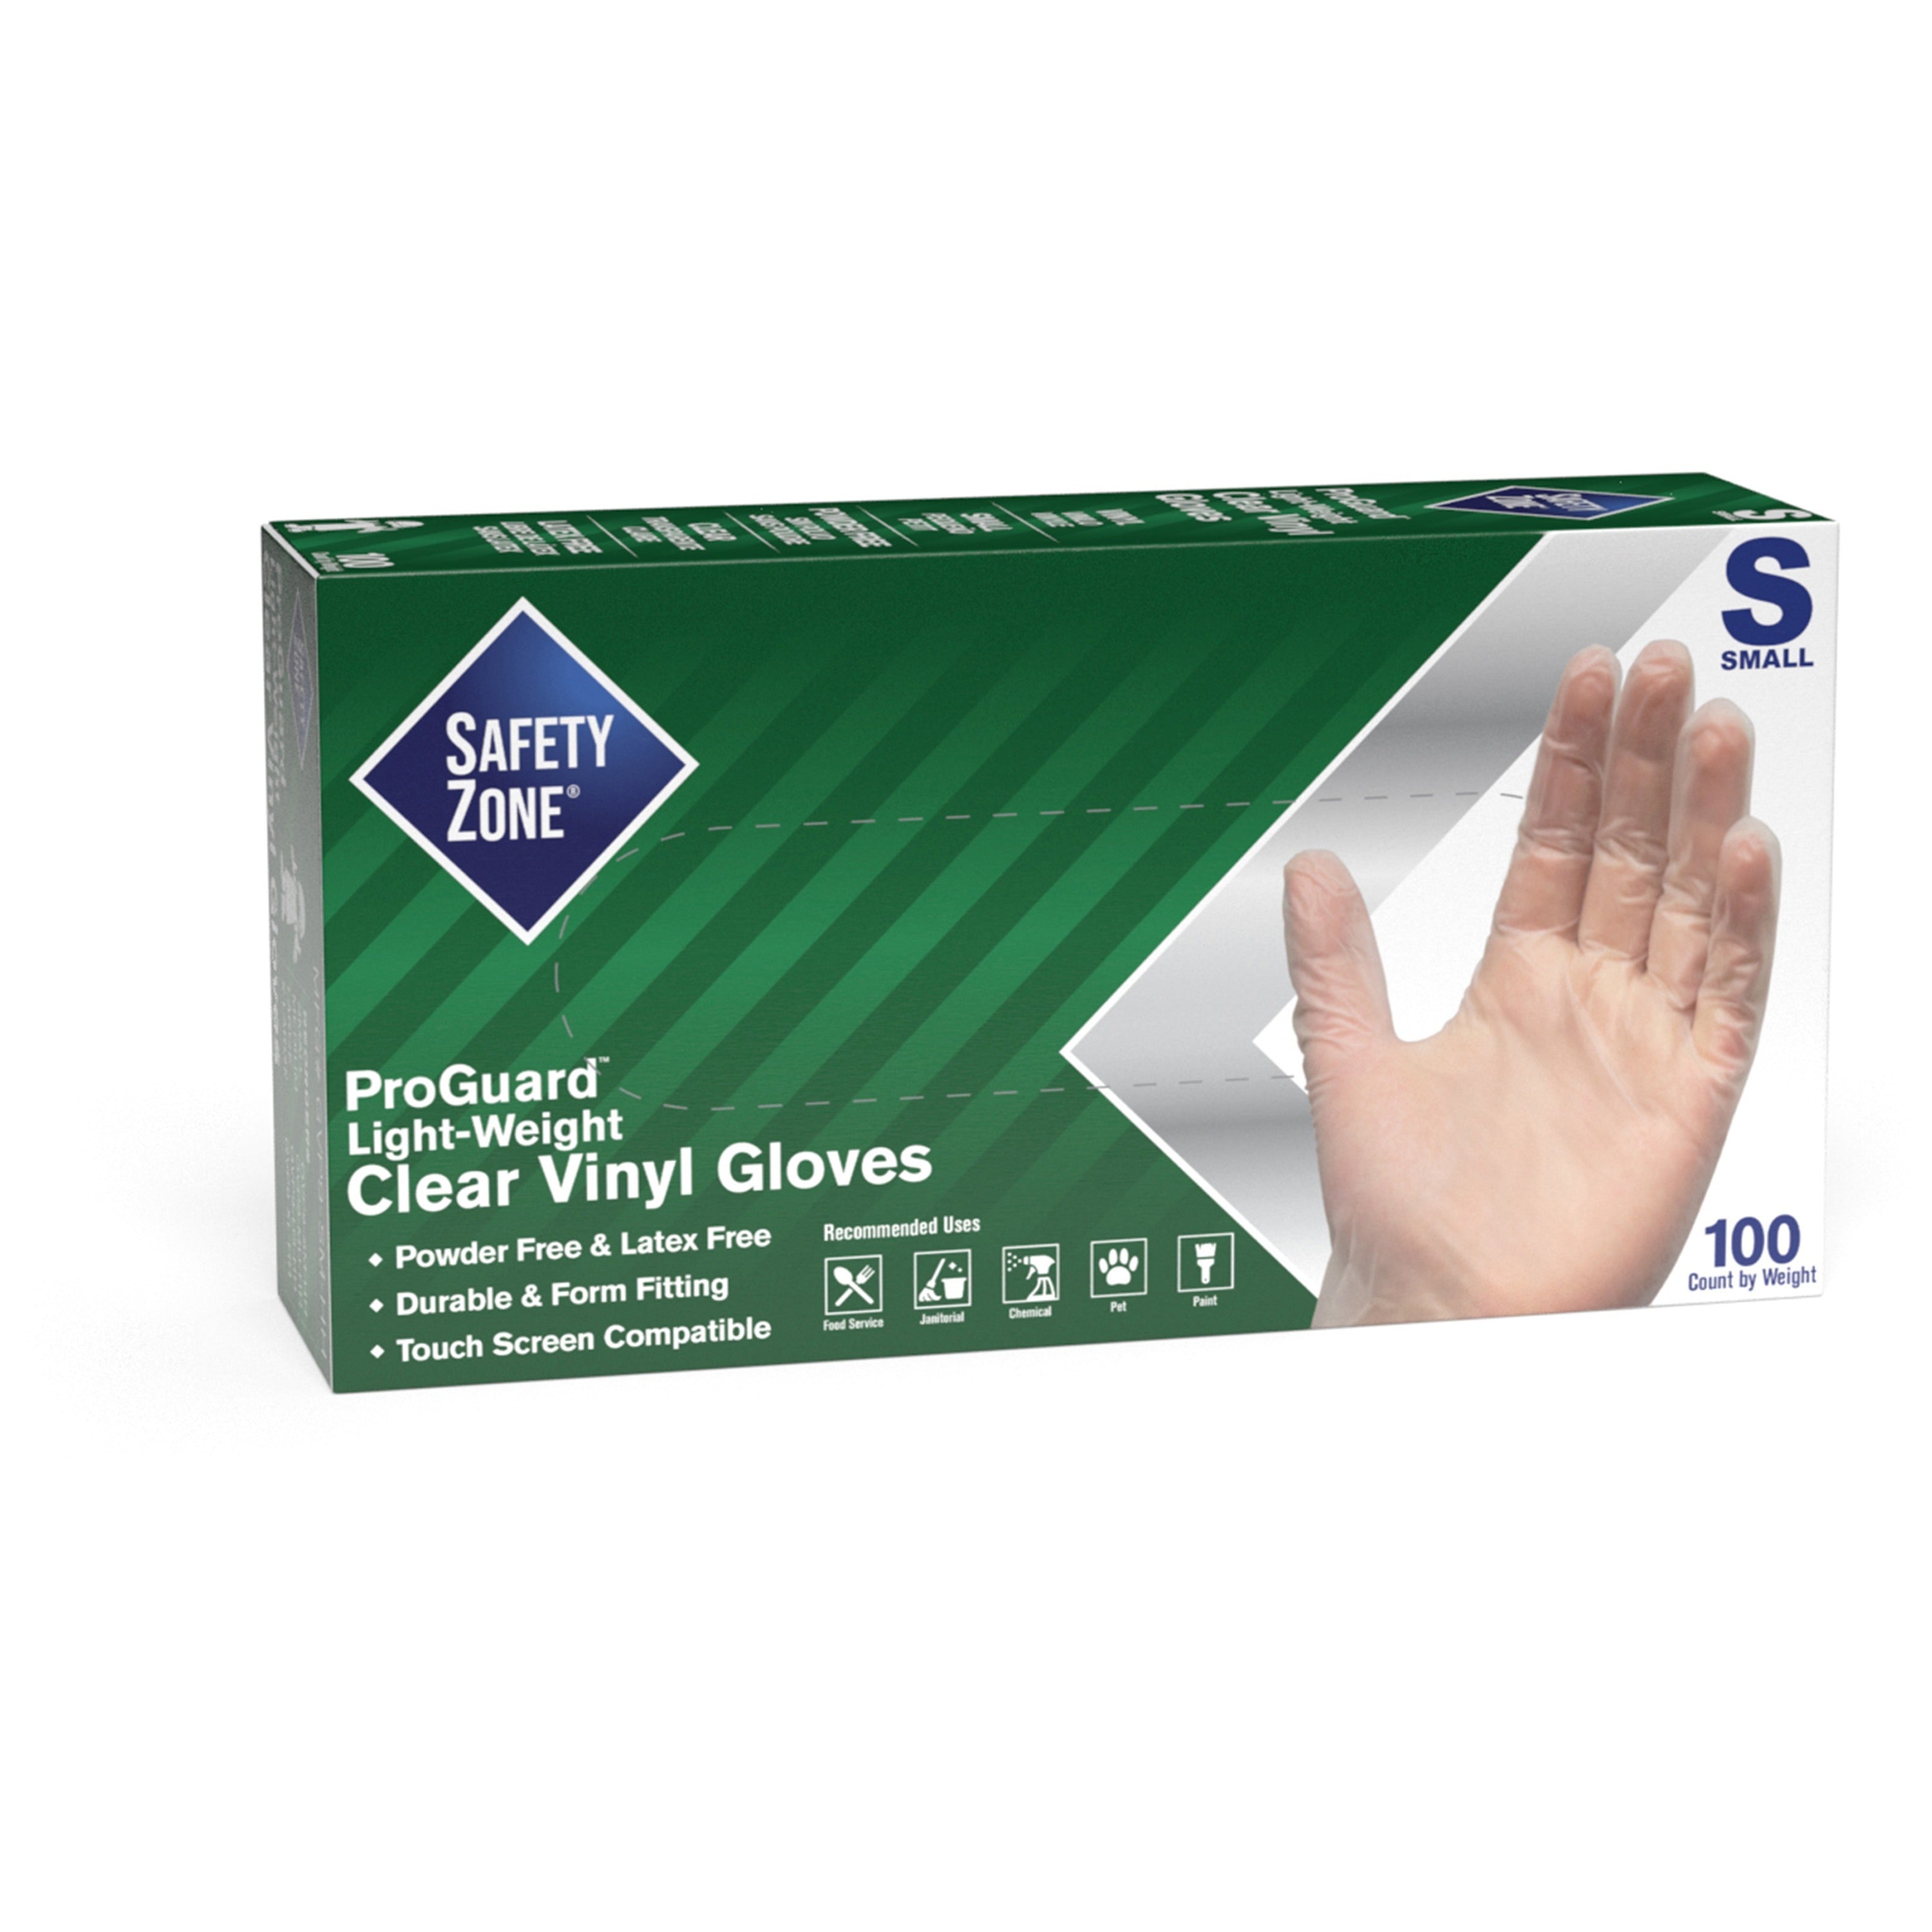 safety-zone-powder-free-clear-vinyl-gloves-small-size-clear-latex-free-dehp-free-dinp-free-pfas-free-for-food-preparation-cleaning-1000-carton-925-glove-length_szngvp9smhhct - 1